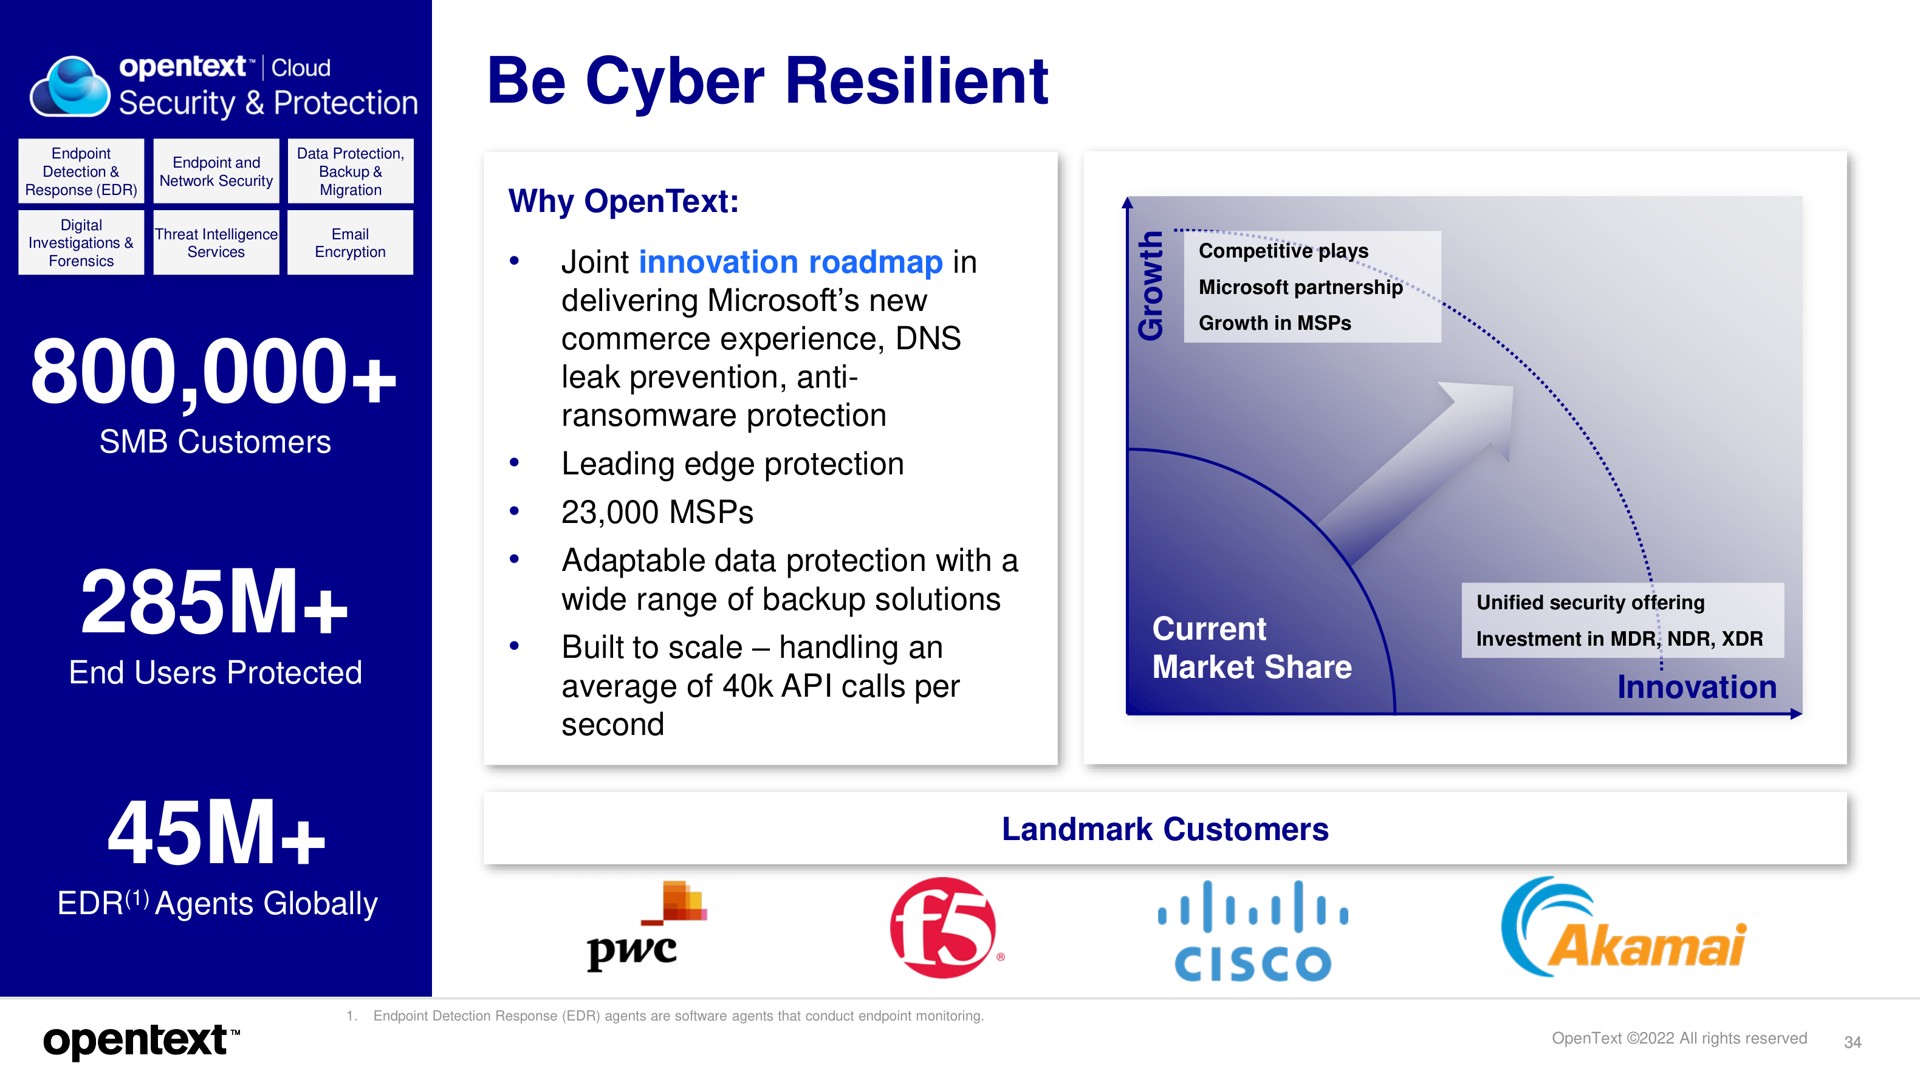 be resilient | OpenText